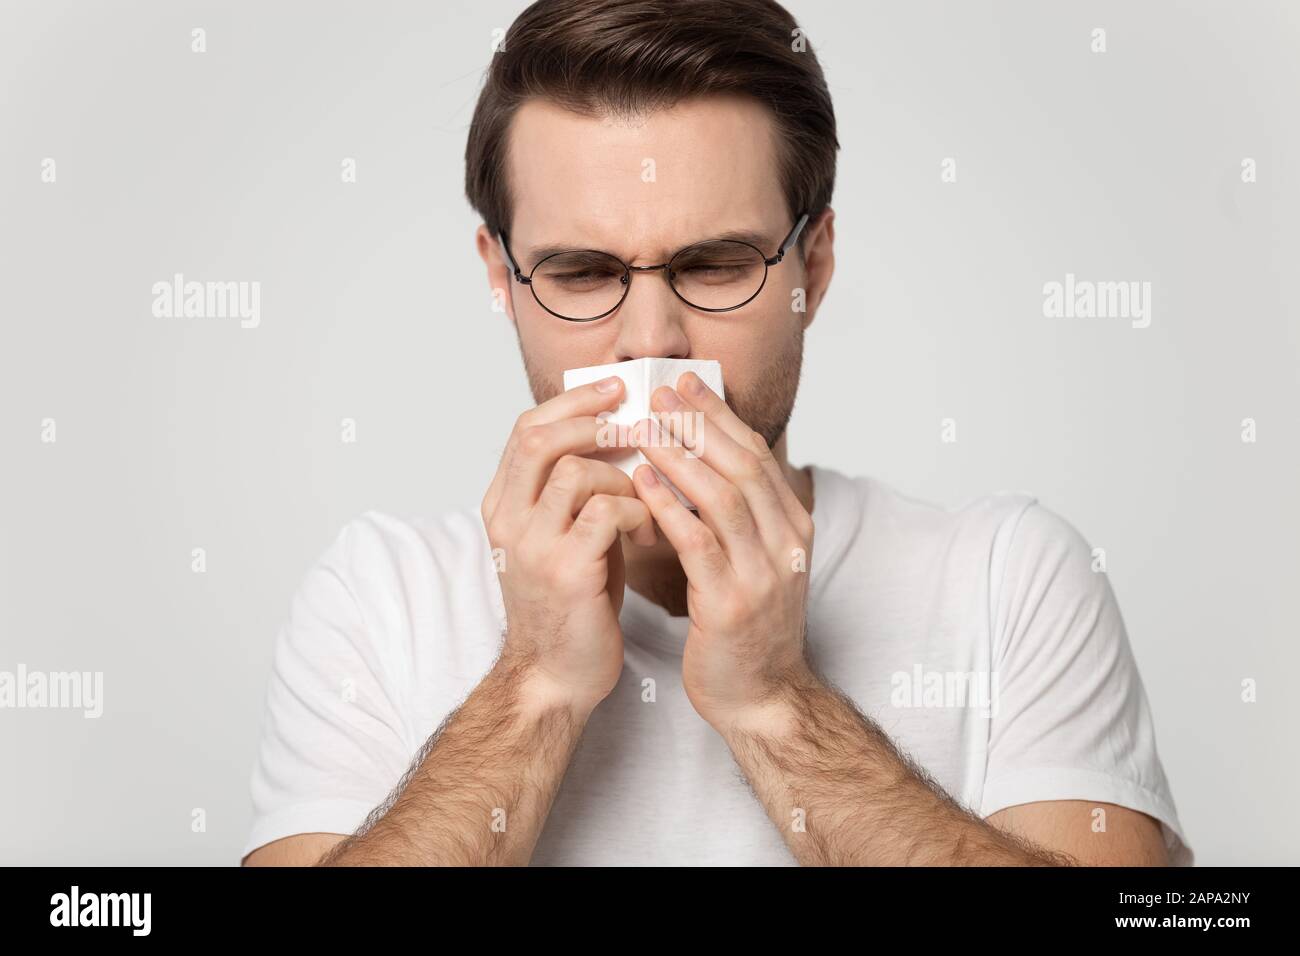 Sick millennial guy caught cold, sneezing, feeling unwell. Stock Photo